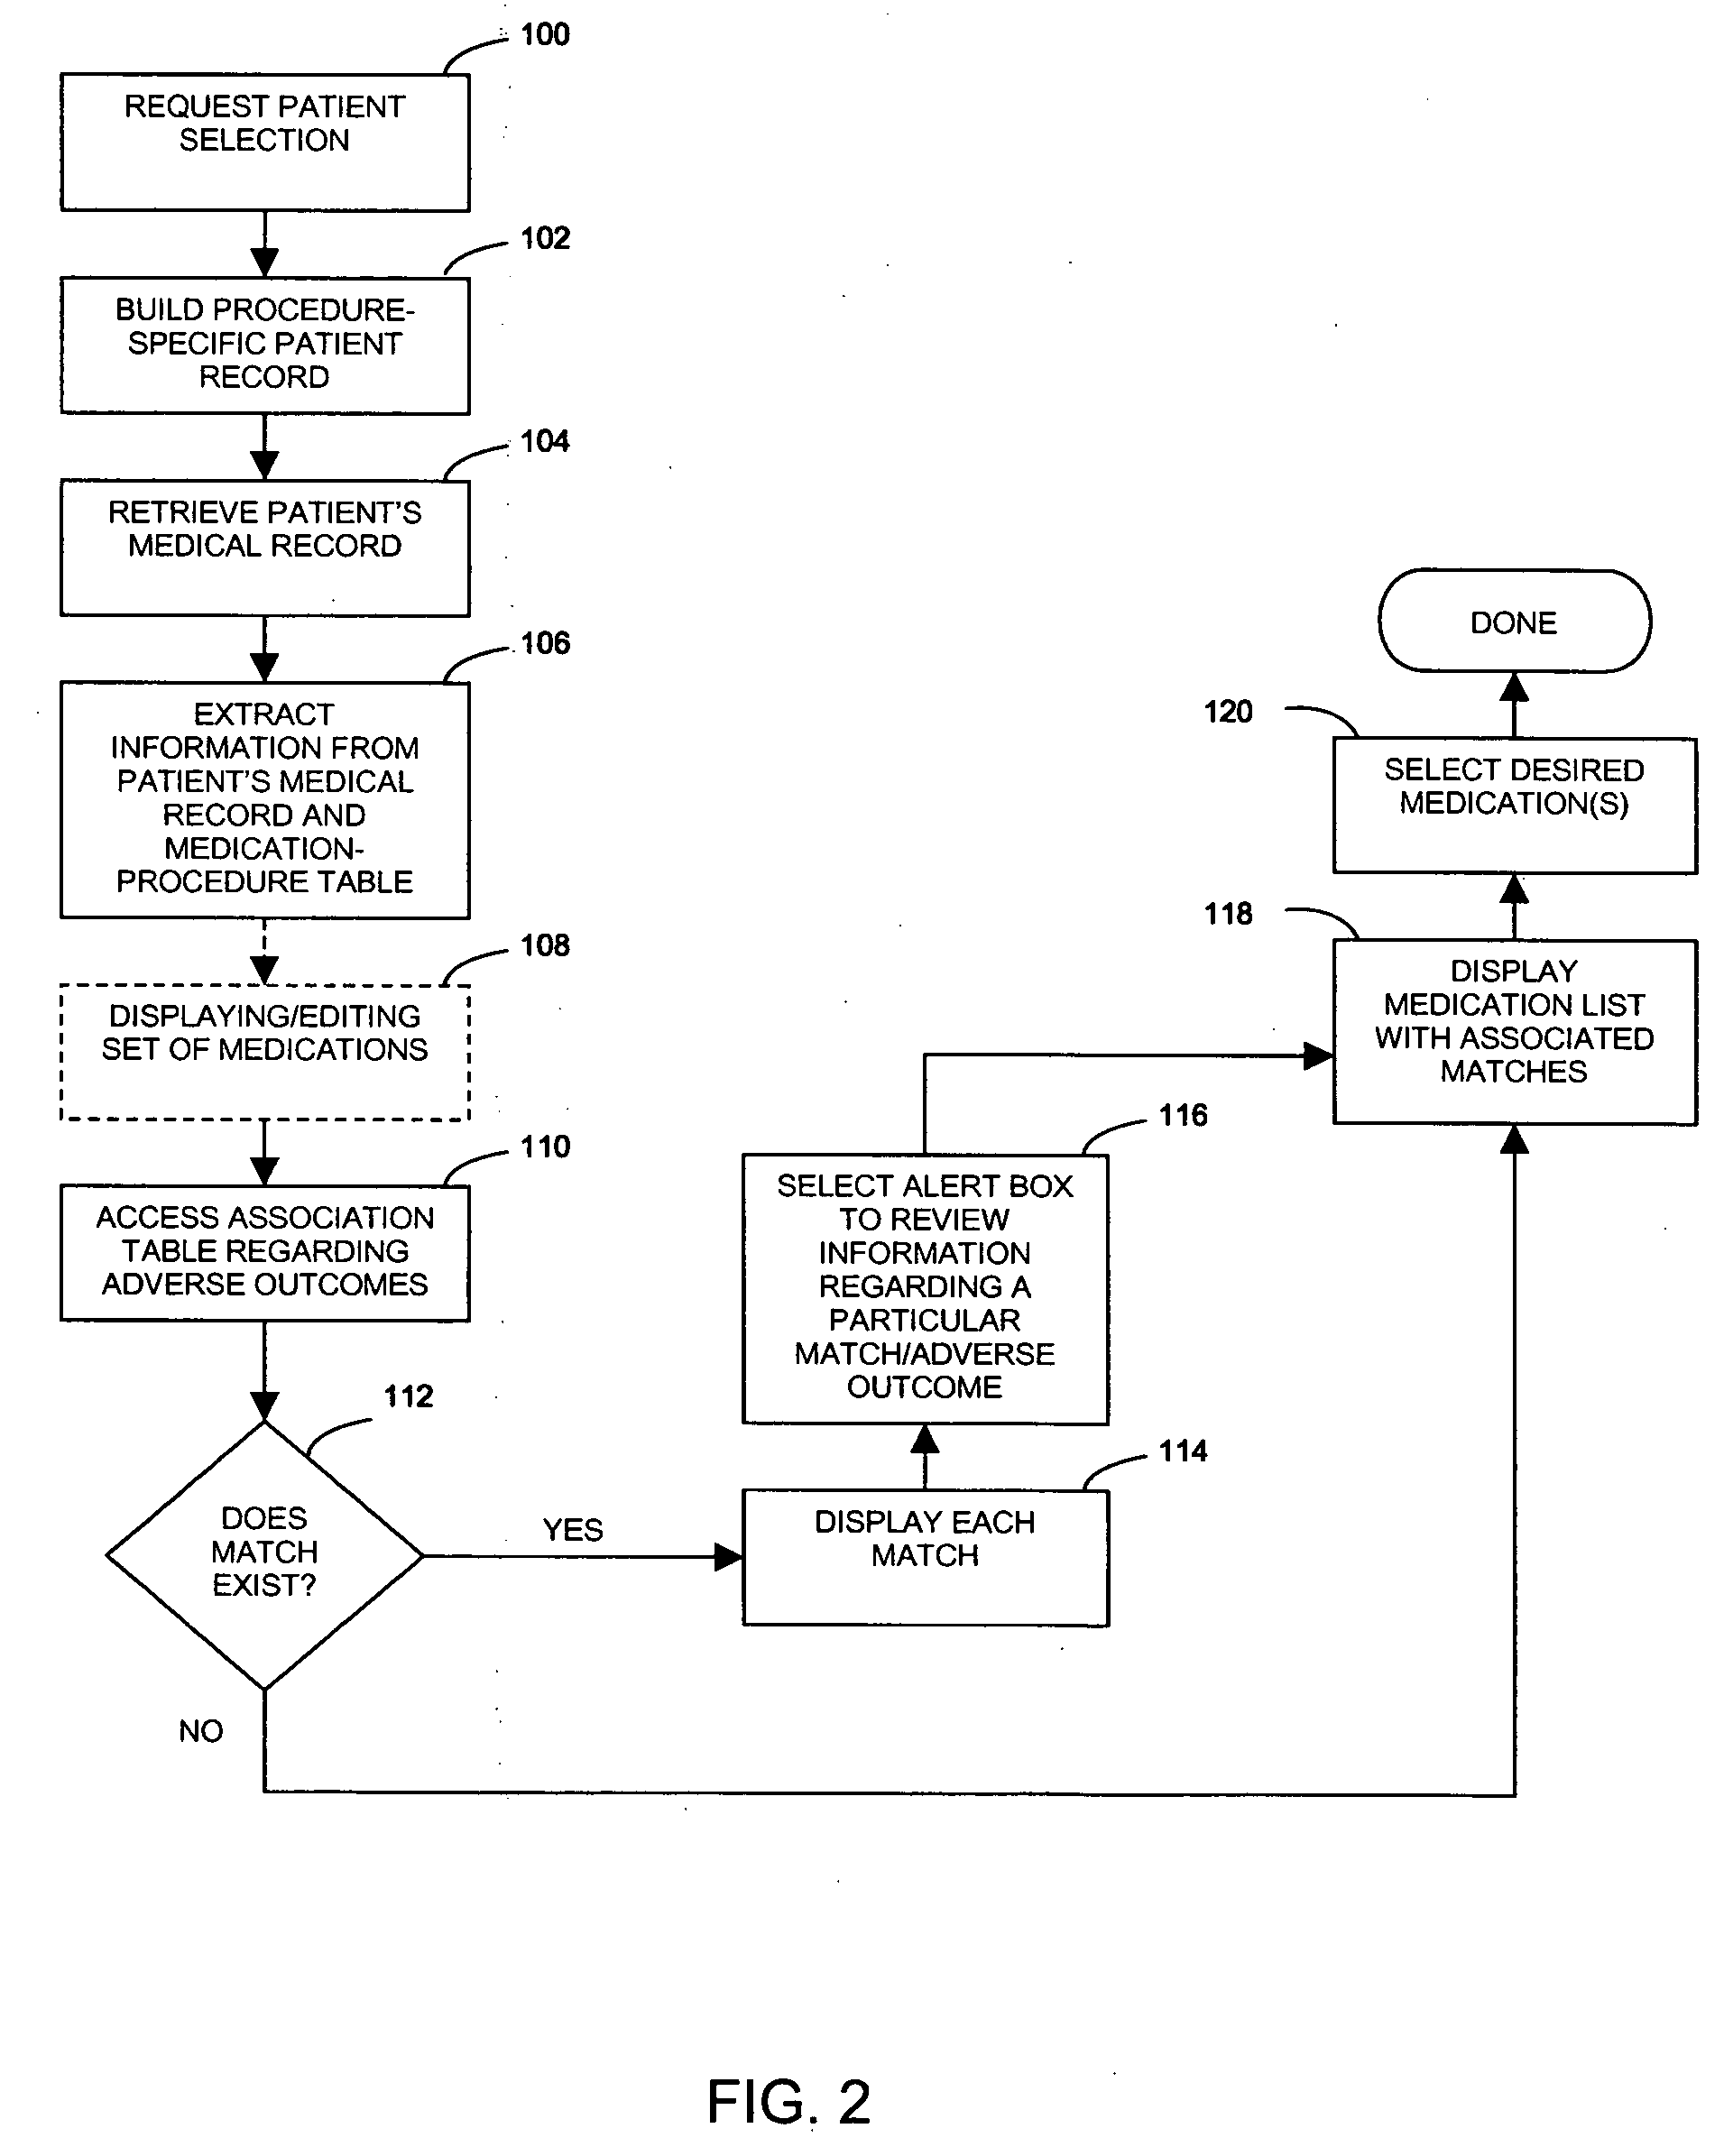 System and method for preemptive determination of the potential for an atypical clinical event related to the administering of medication